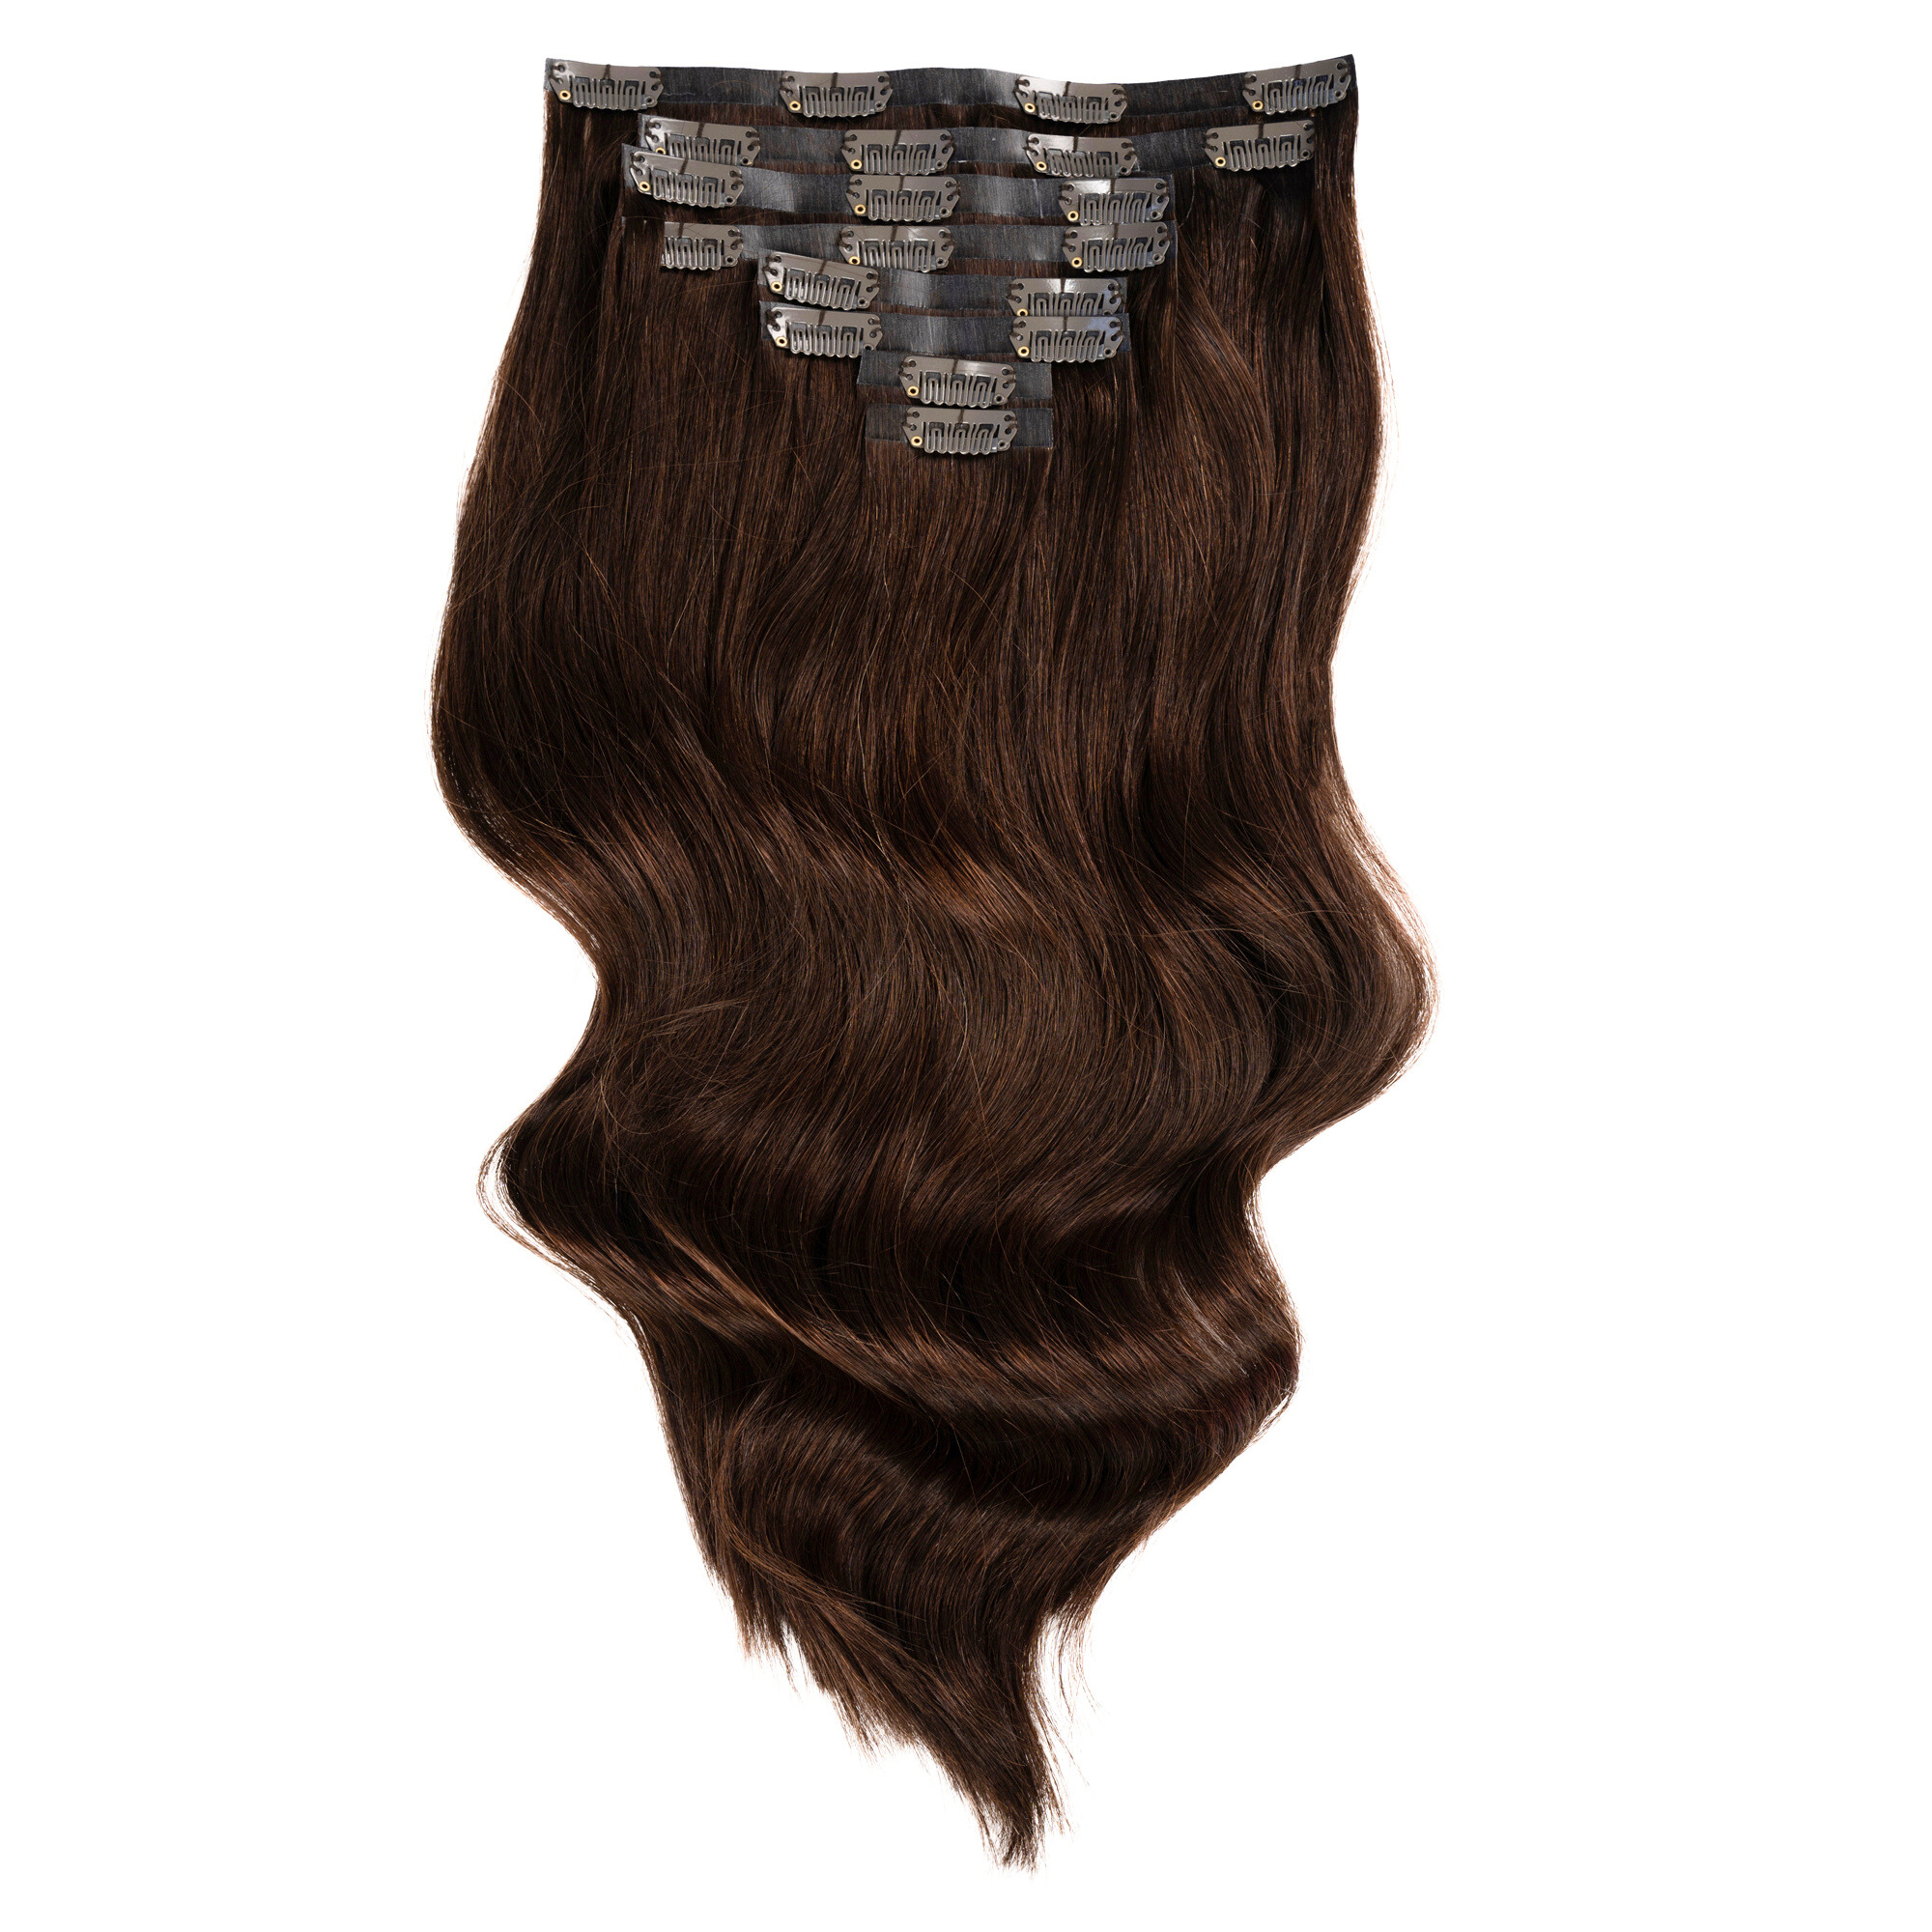 Empress Deluxe Clip-in Hair Extensions 18" Colour 4 Brown - Maneology Hair Extensions